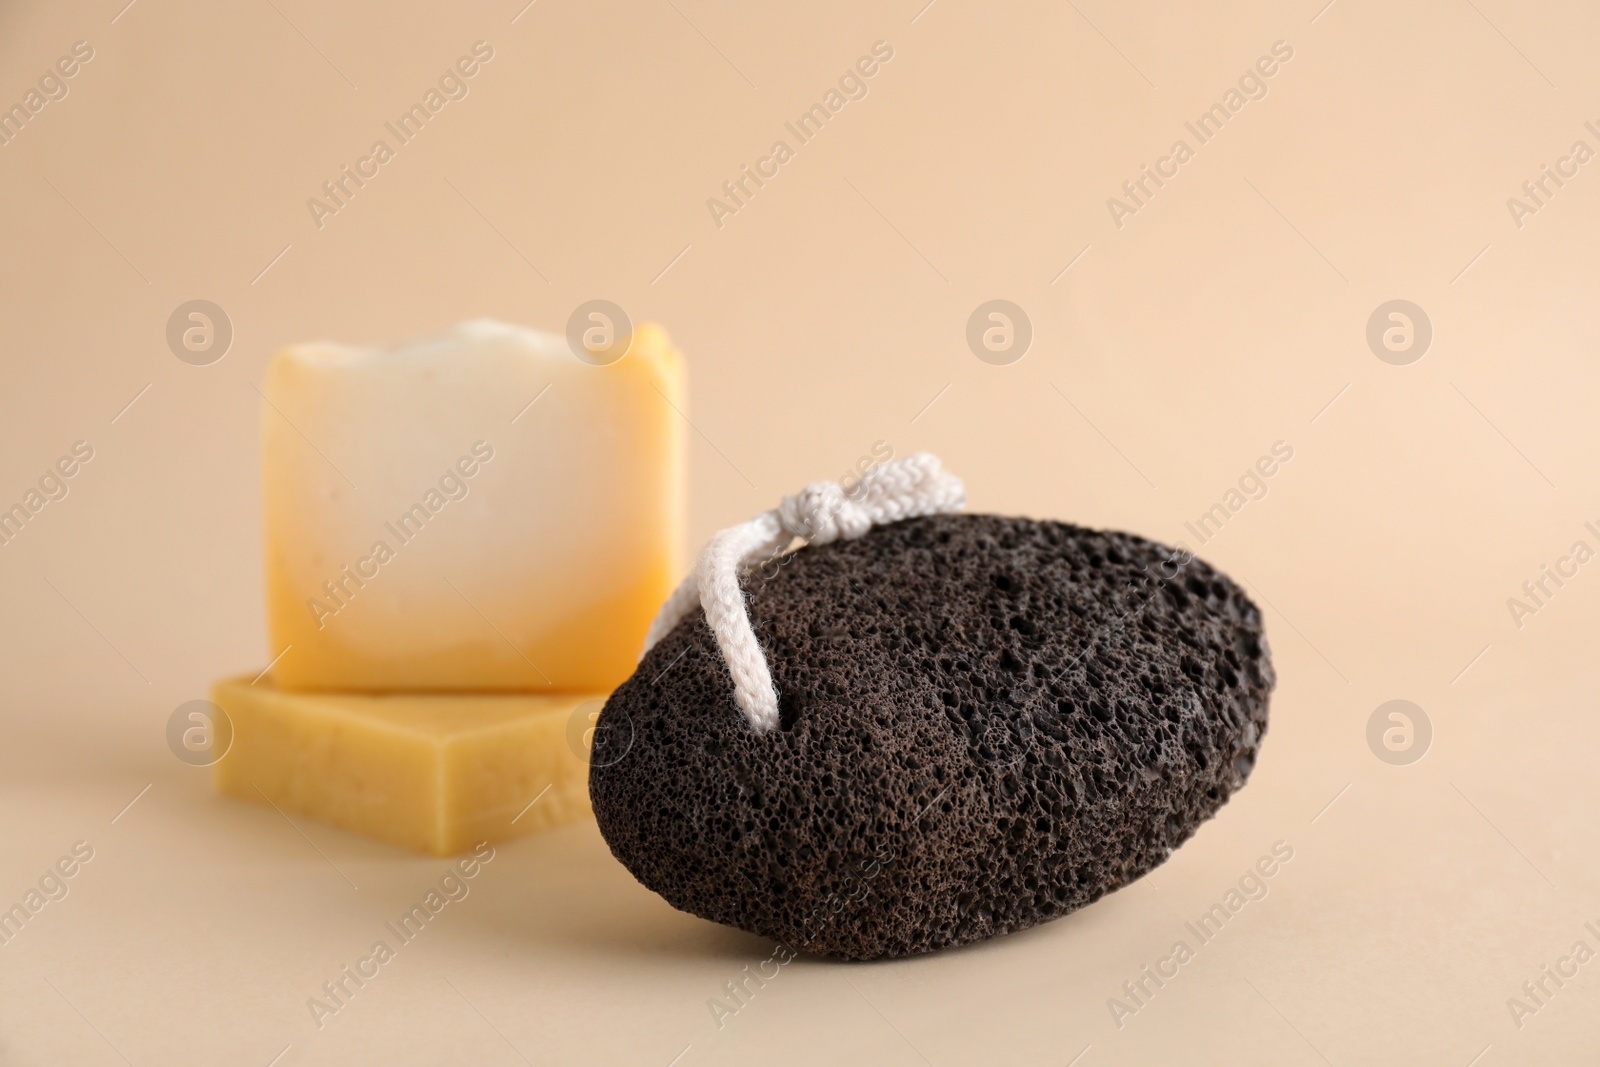 Photo of Pumice stone and soap bars on beige background